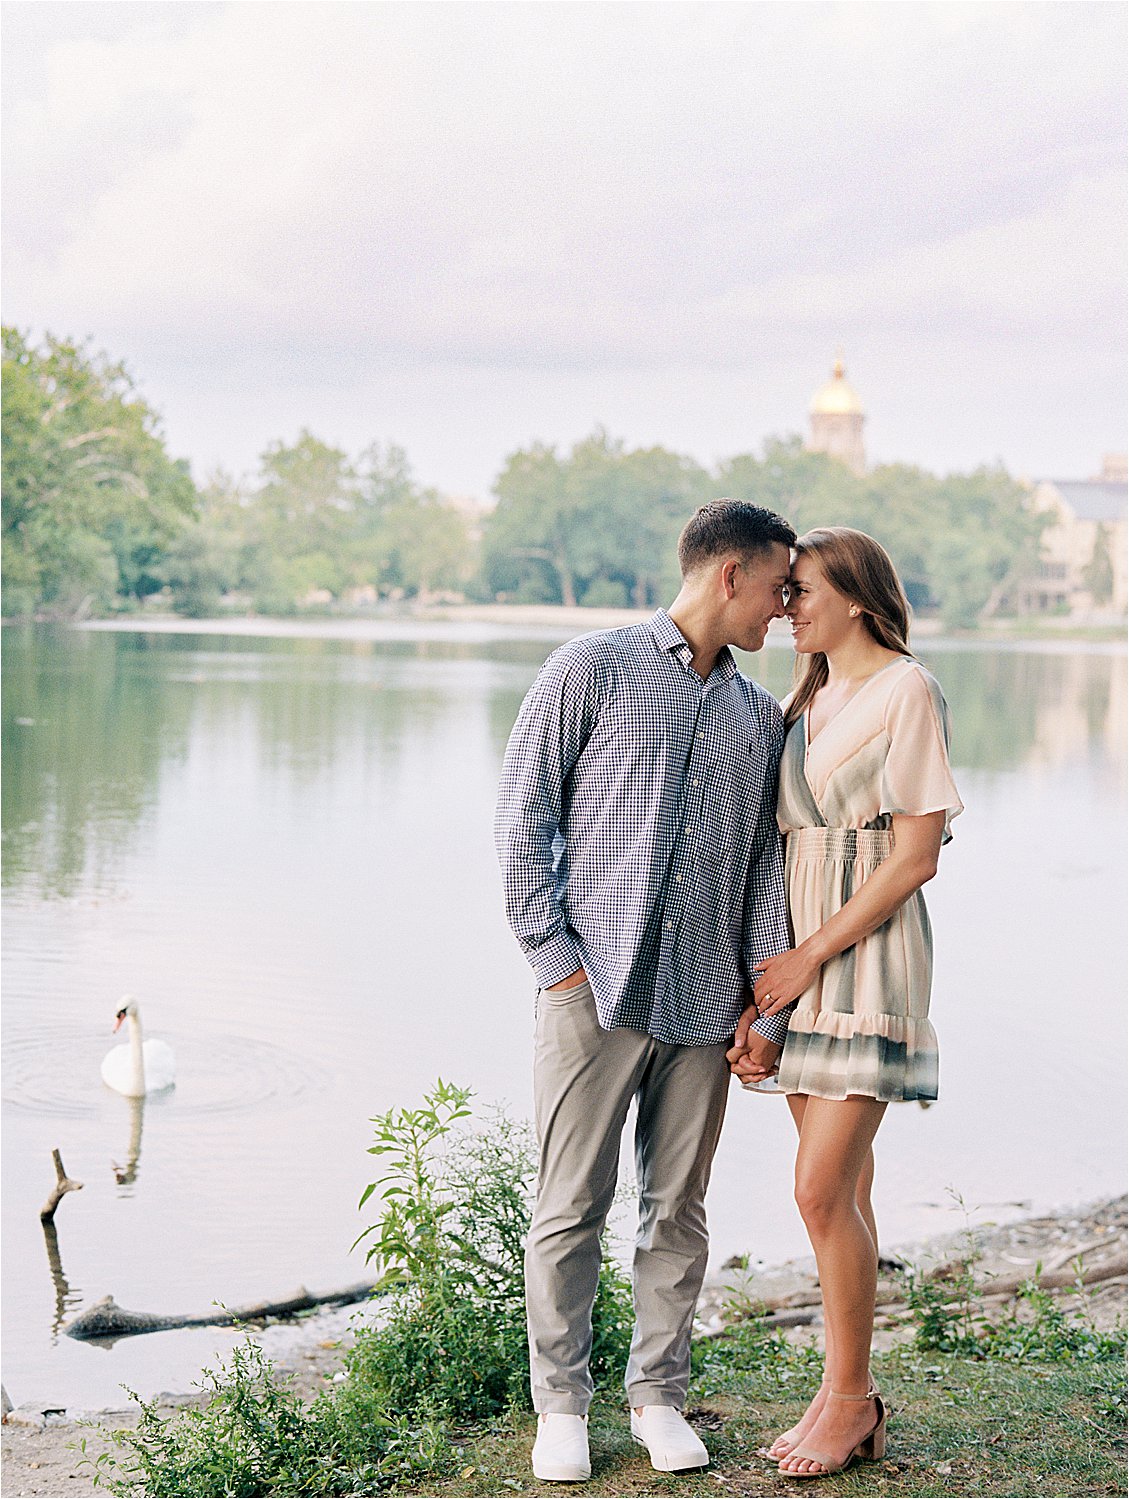 Summer Engagement Session at University of Notre Dame with Chicago Film Wedding Photographer Renee Hollingshead